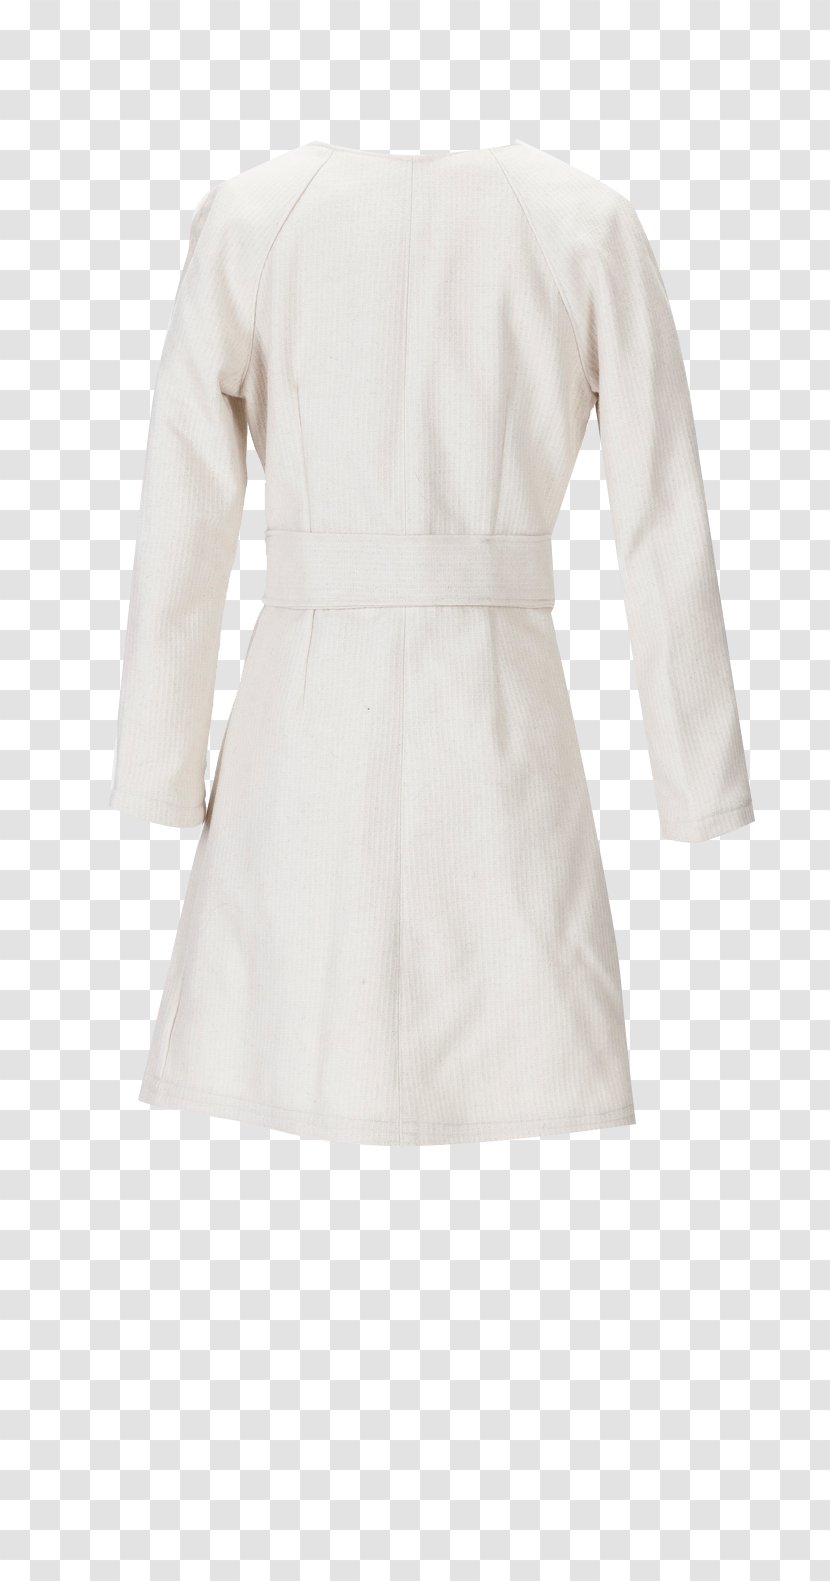 Trench Coat Sleeve Dress Neck - White Transparent PNG